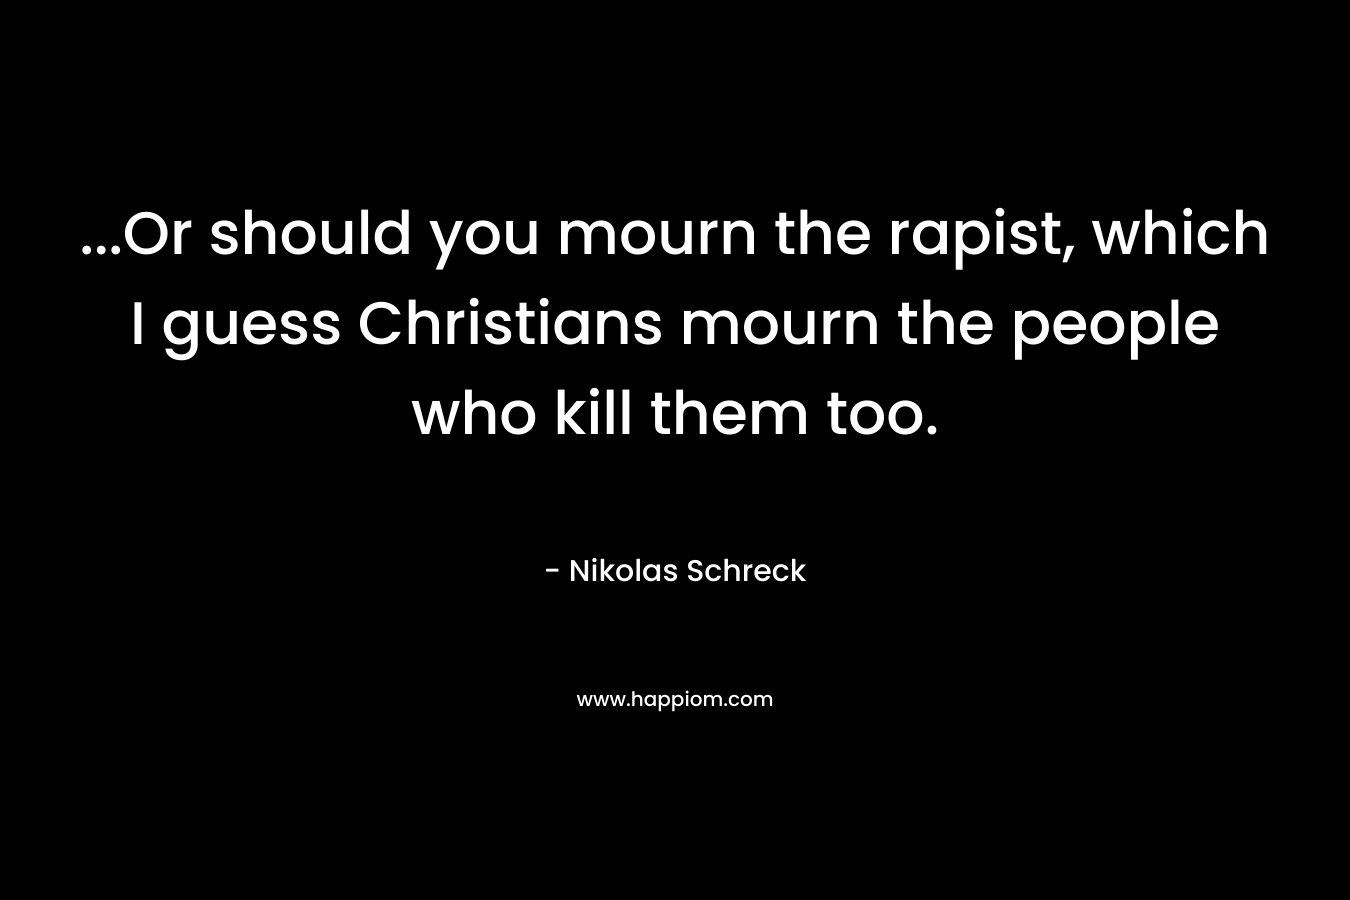 ...Or should you mourn the rapist, which I guess Christians mourn the people who kill them too.